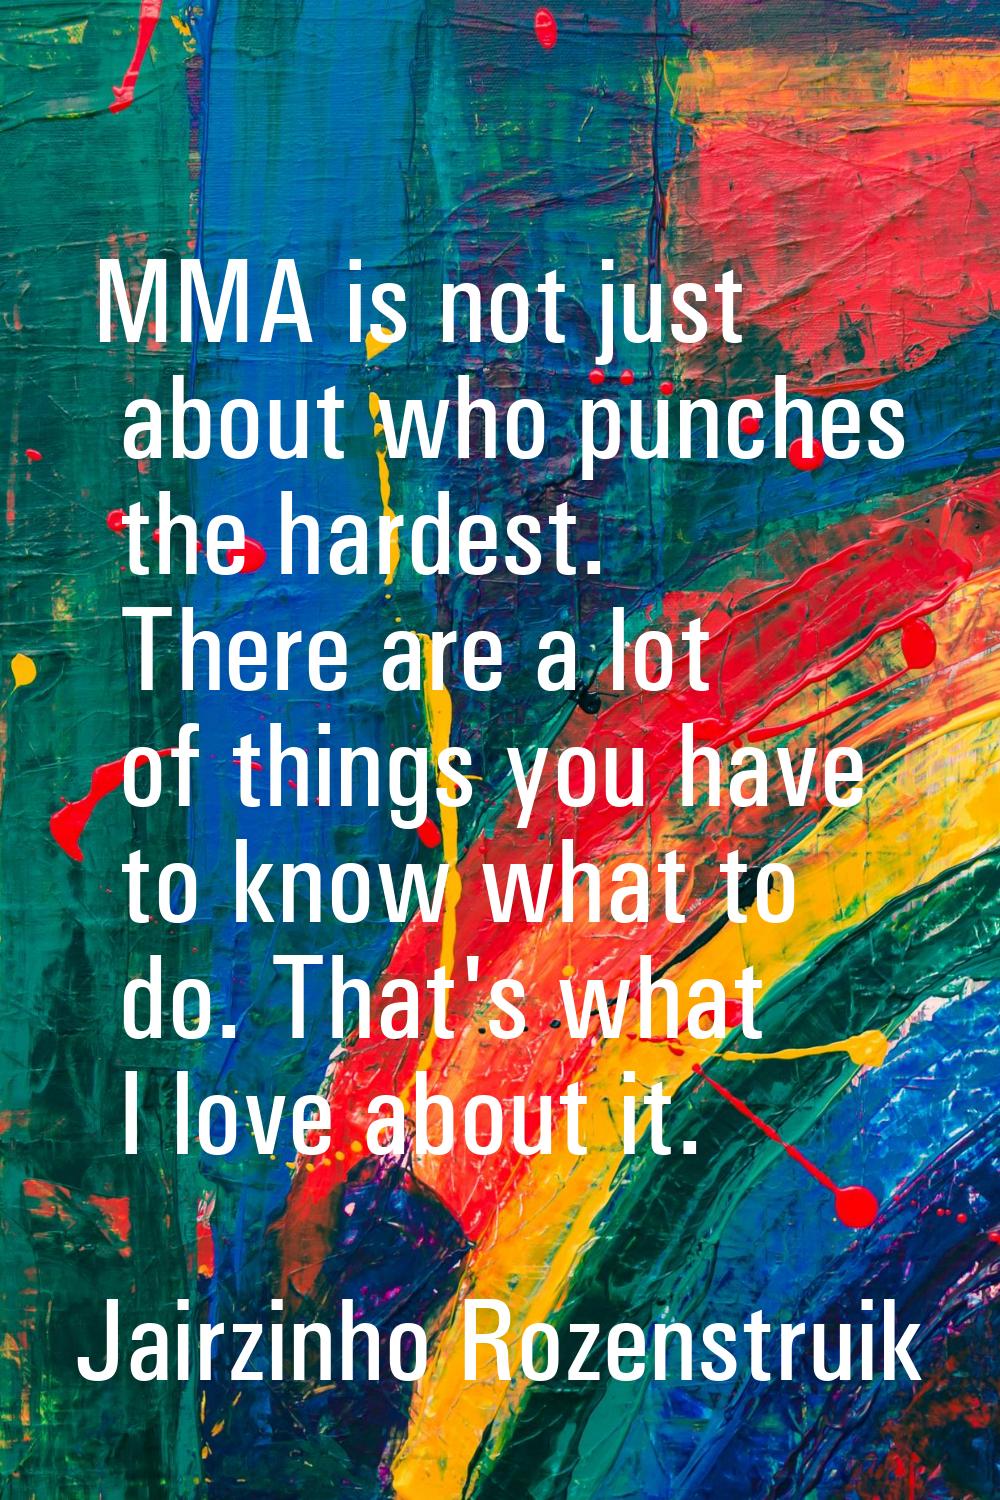 MMA is not just about who punches the hardest. There are a lot of things you have to know what to d